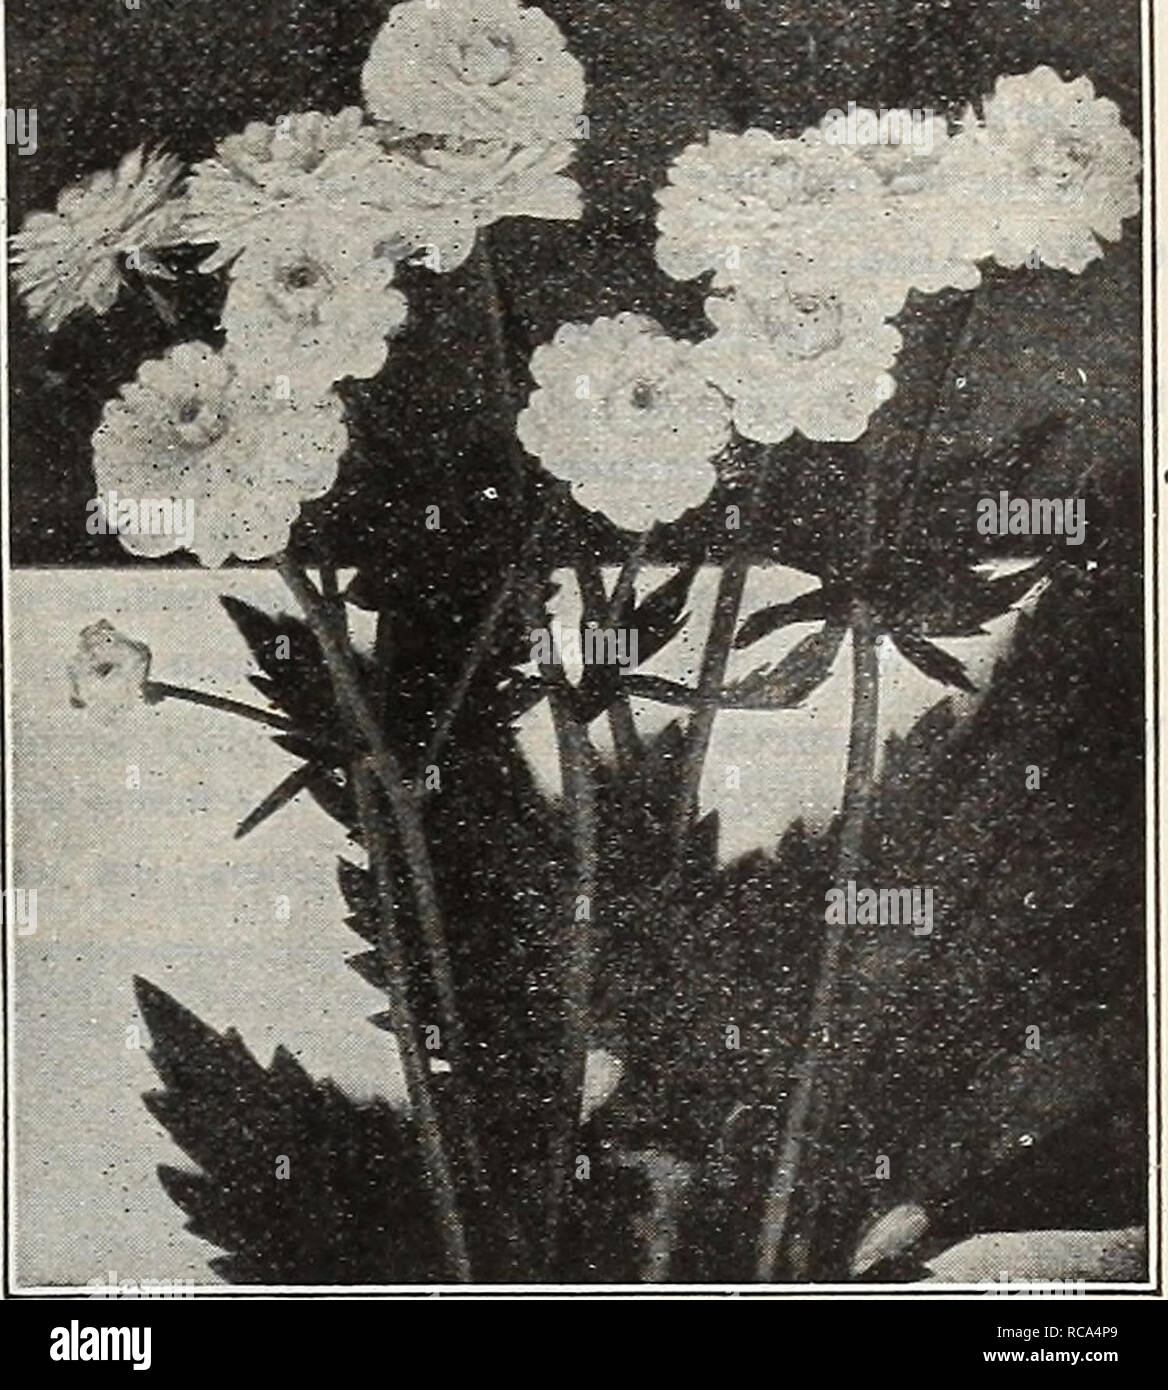 . Dreer's garden book 1918. Seeds Catalogs; Nursery stock Catalogs; Gardening Equipment and supplies Catalogs; Flowers Seeds Catalogs; Vegetables Seeds Catalogs; Fruit Seeds Catalogs. .HHIRTADRKR ^IIAKLPHIA'PA-S.HARDY PERENNIAL PIAMT3 211 PULMONARIA (Lungwort, Bethlehem Sage) Angustifolia Azurea [Blue Cowslip, or Lungwort). The prettiest of the blue Cowslips ; grows about a foot high, and one of the first to bloom in early spring, bearing attractive funnel-shaped, deep gentian - blue flowers ; very desirable. Saccharata Maculata. A beautiful plant, rivaling in the markings of its foliage many  Stock Photo